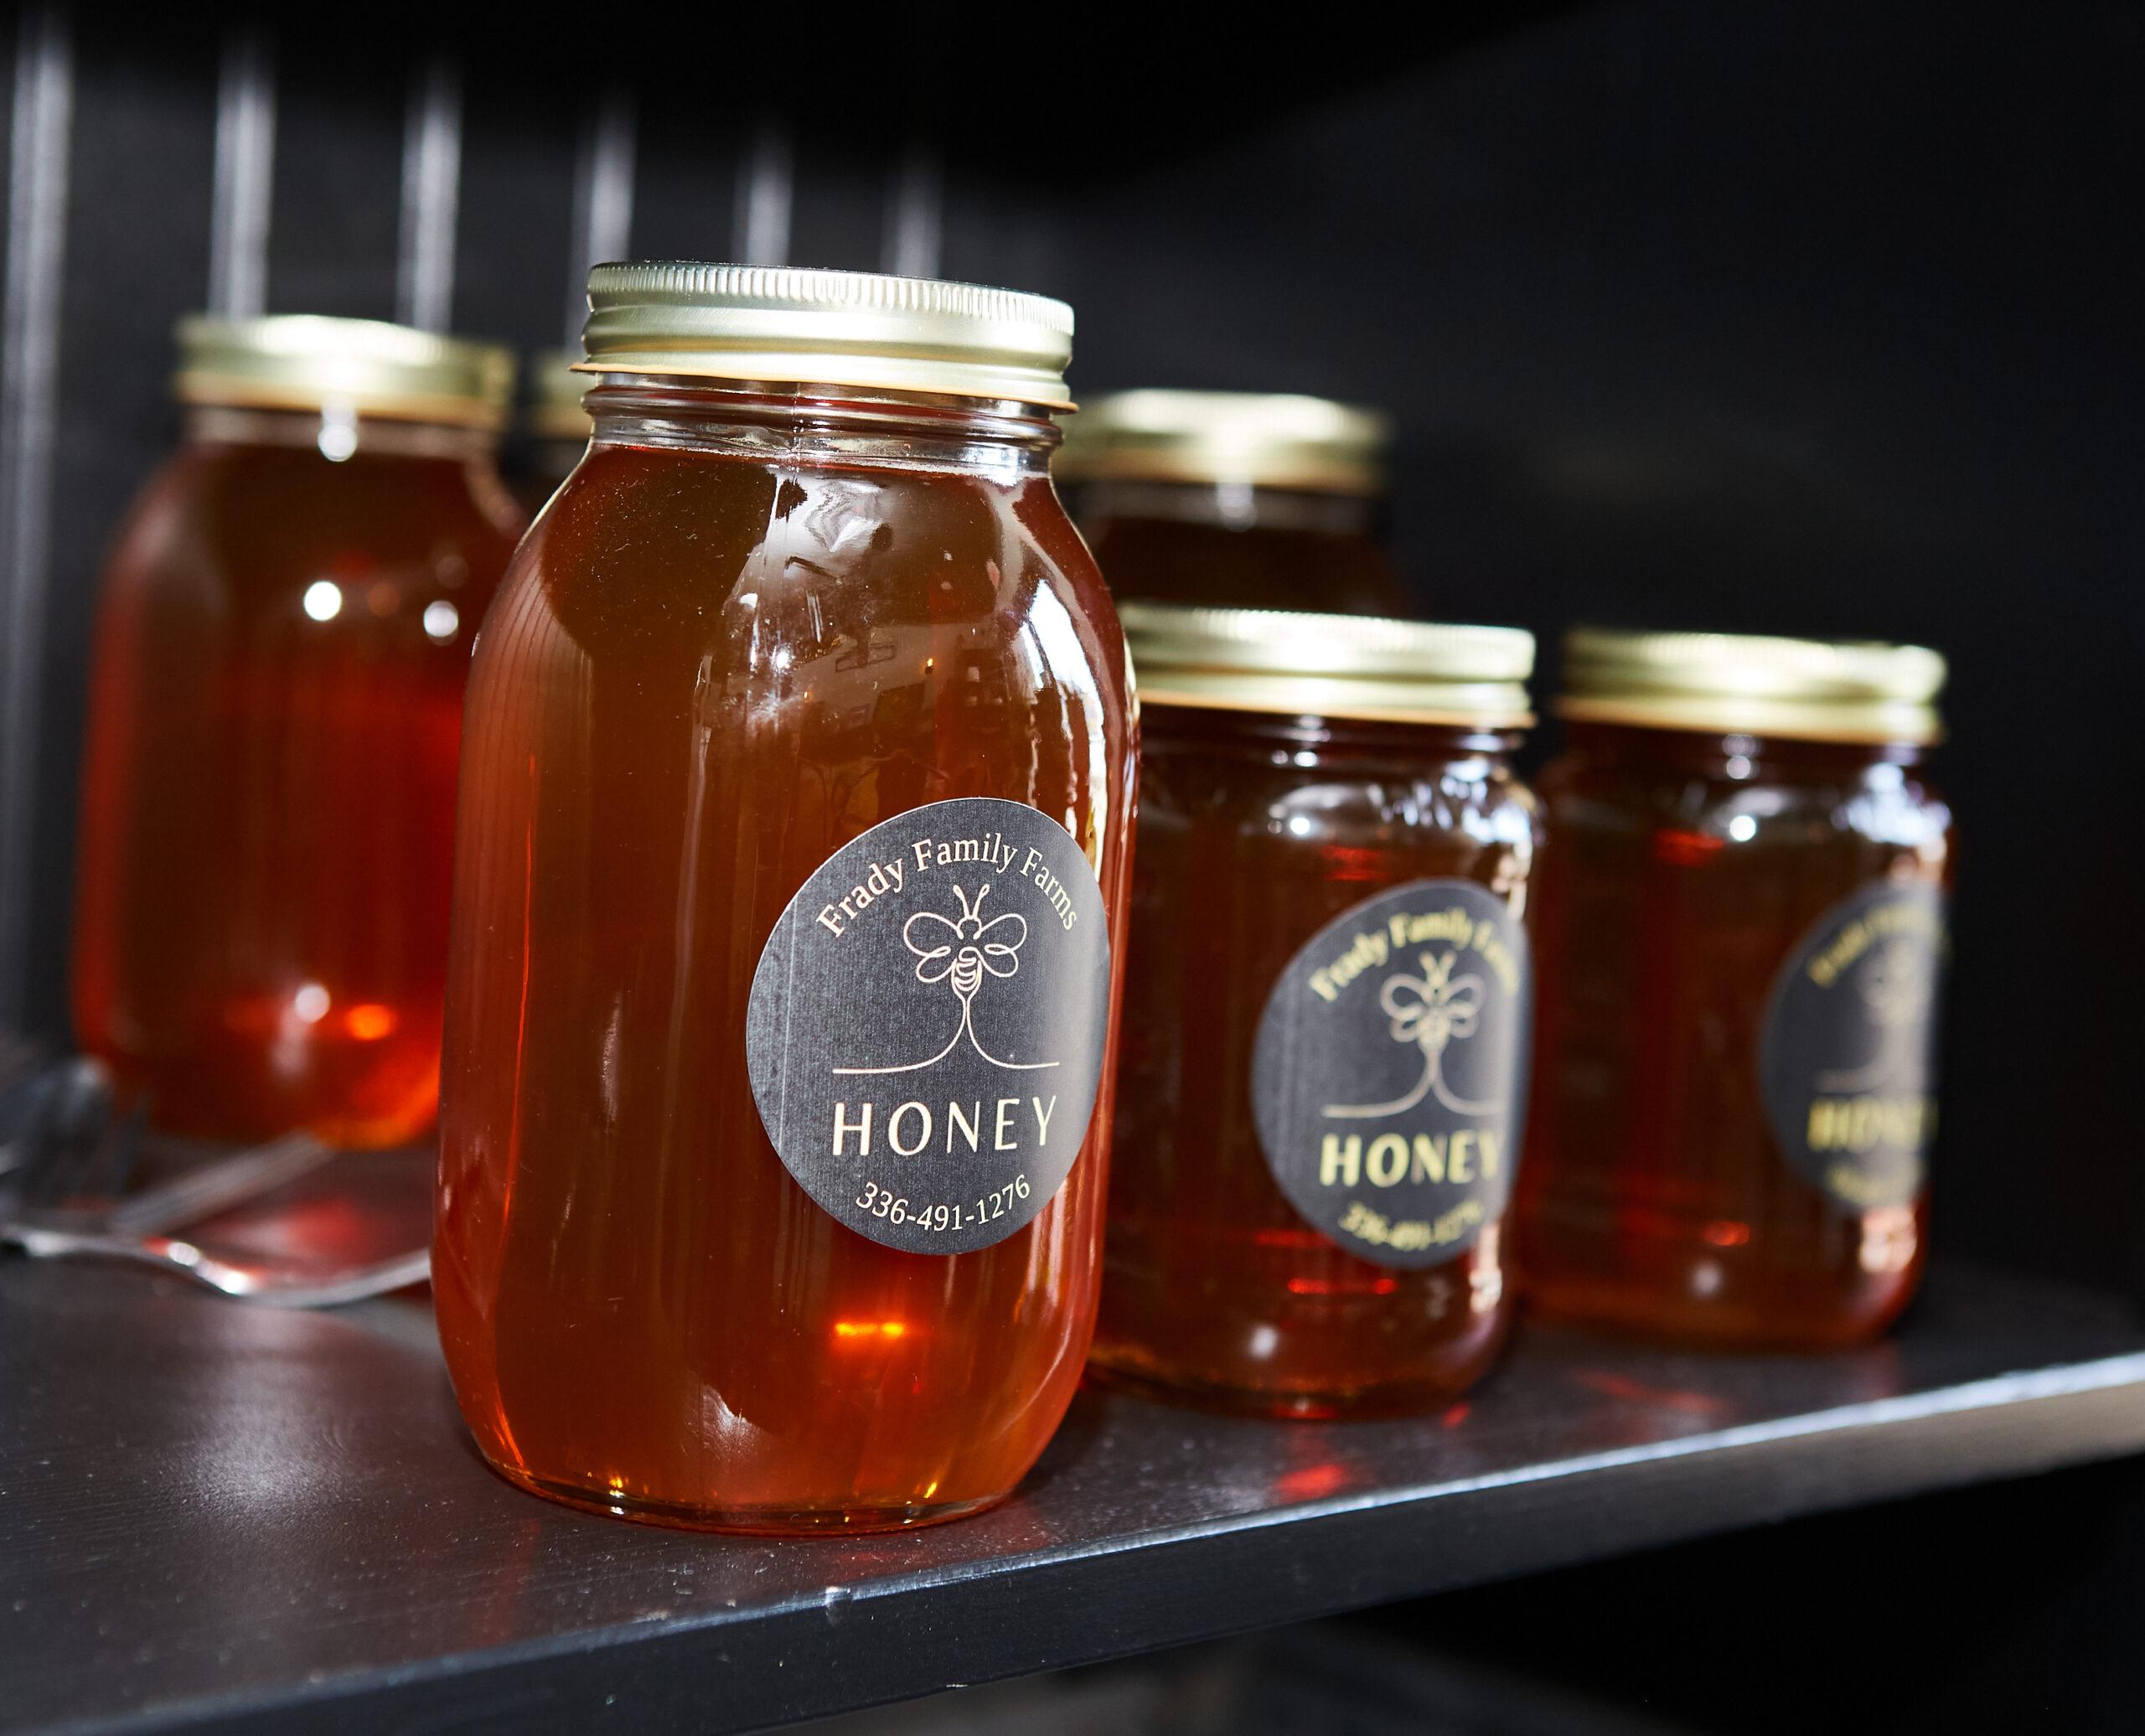 Locally sourced honey at Frady's Taphouse & Eatery in High Point, NC.